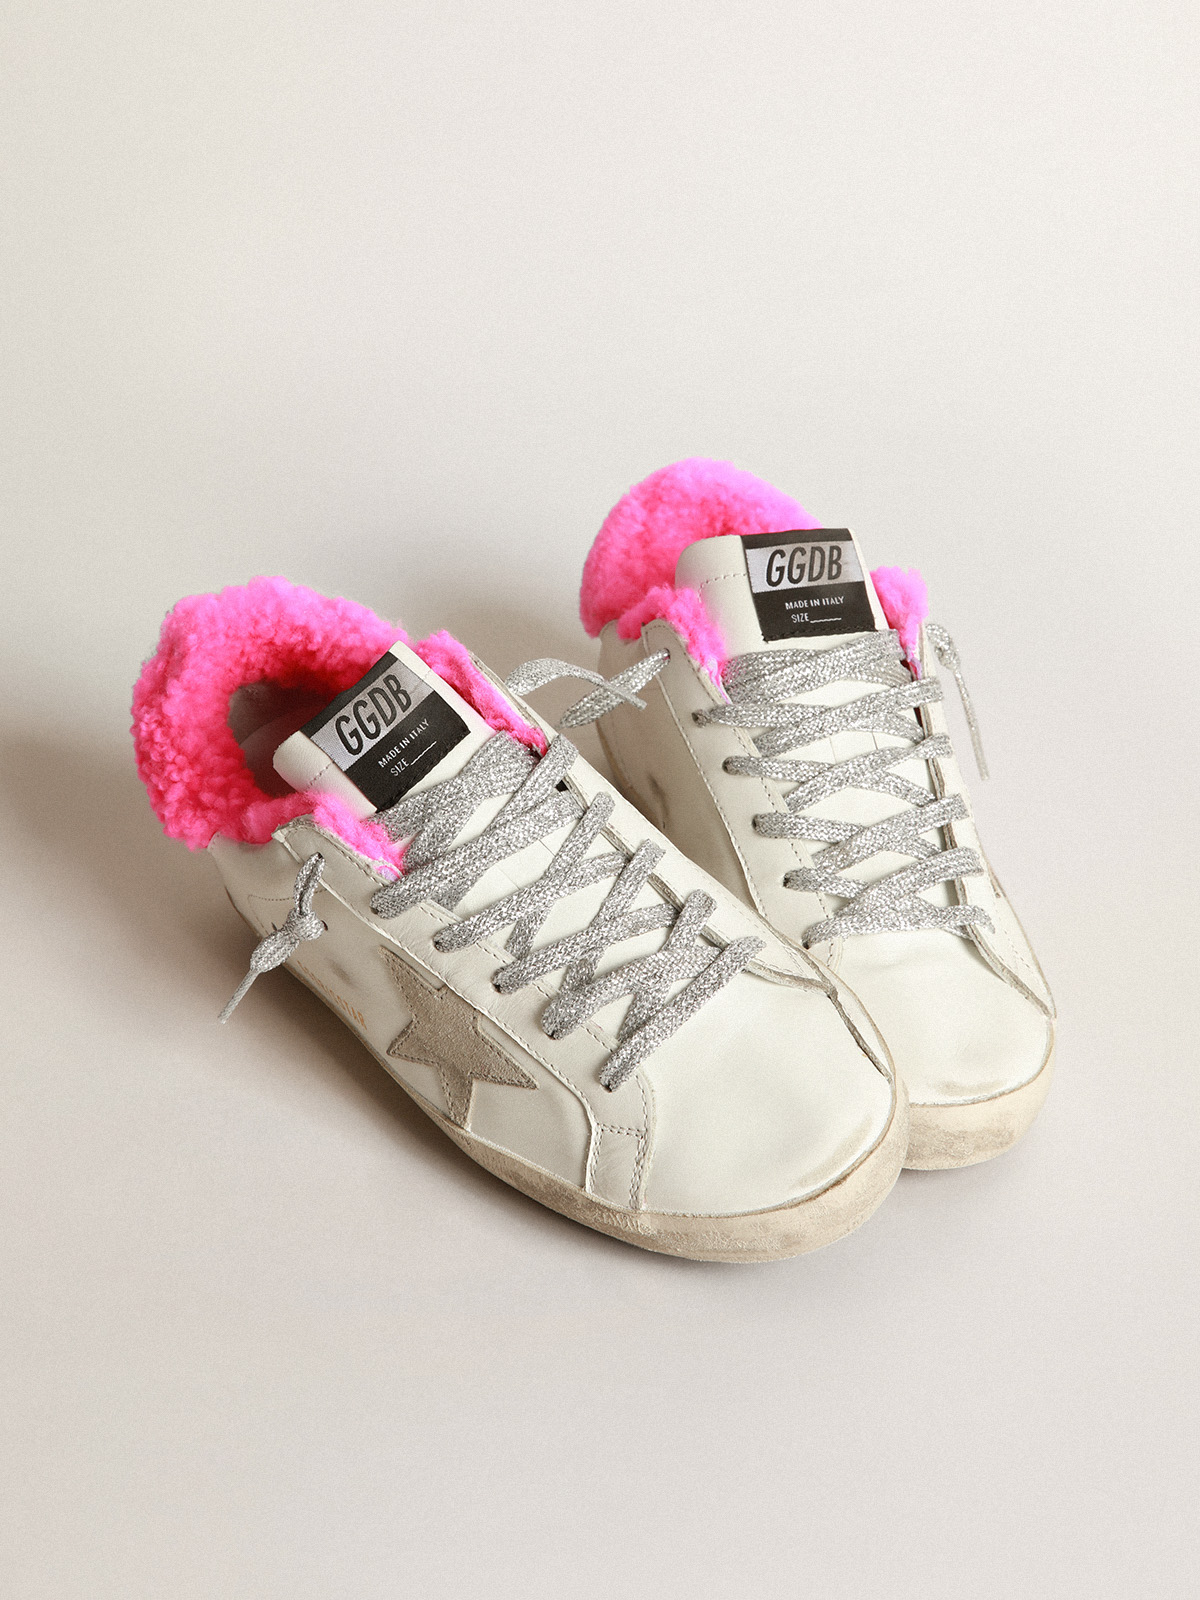 Super-Star sneakers with fuchsia shearling lining and ice-gray suede star |  Golden Goose